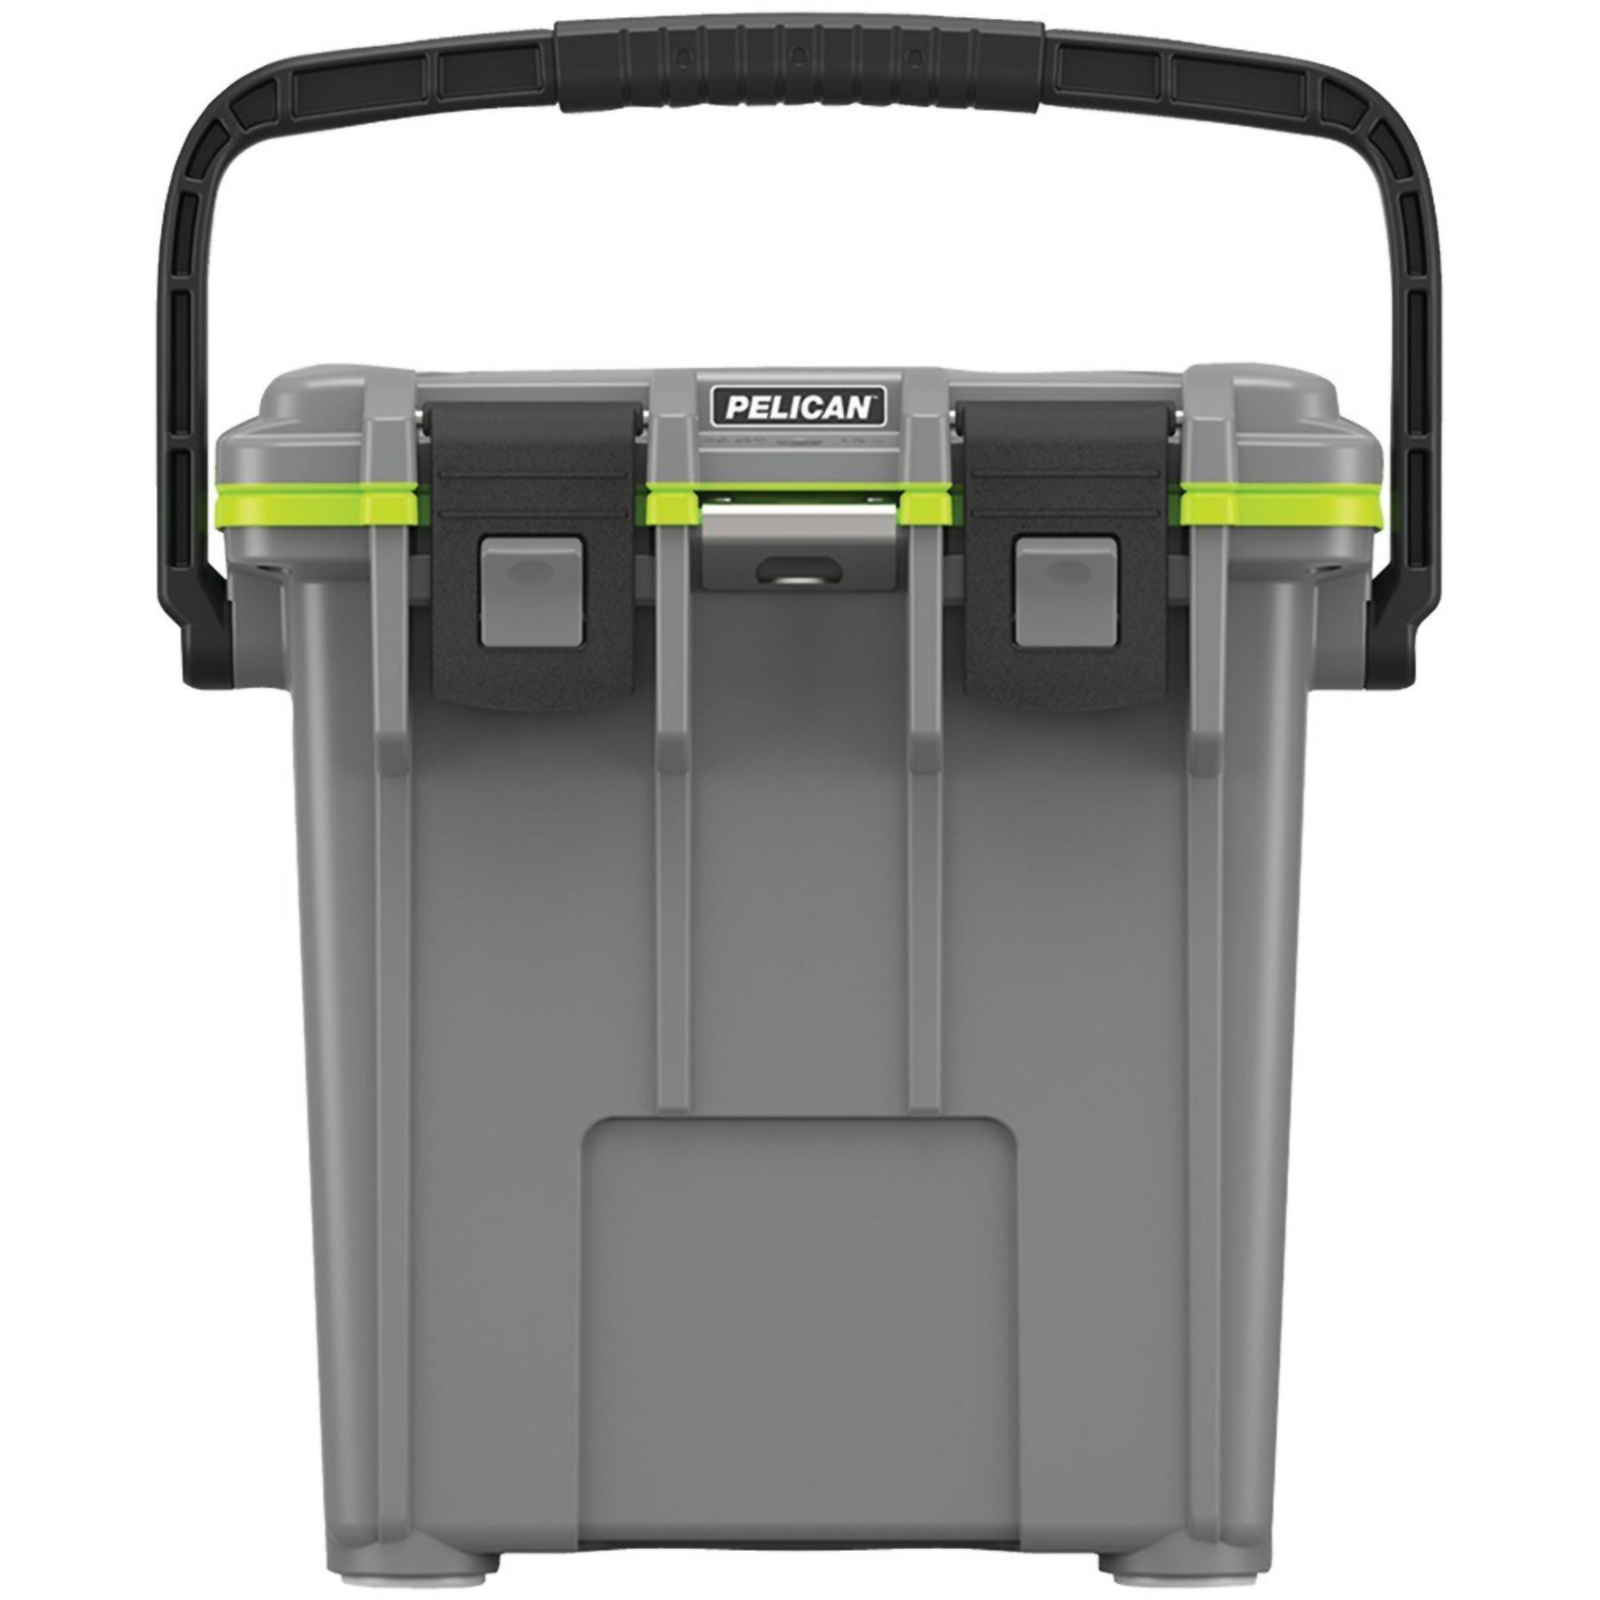 PELICAN PRODUCTS ProGrear Elite 20qt. Cooler with Polyurethane Insulation - Dark Gray and Green